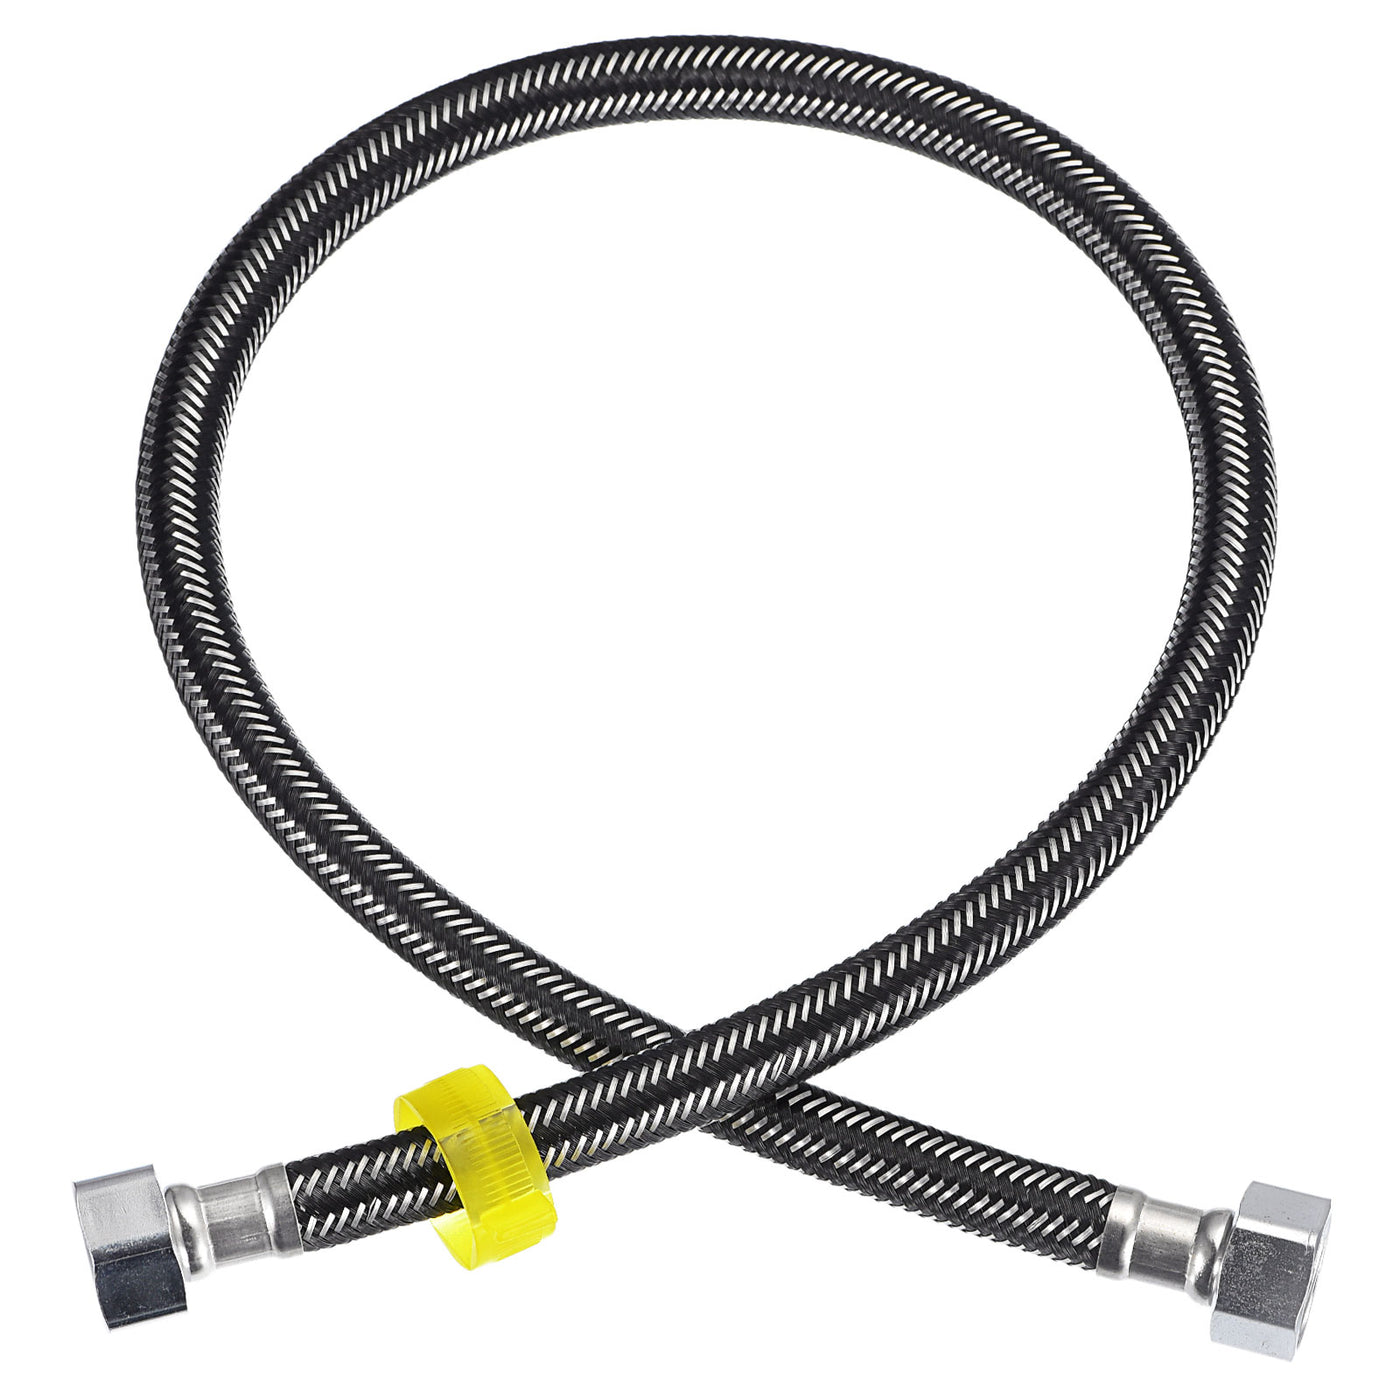 uxcell Uxcell Faucet Supply Line Connector, G1/2 Female x G1/2 Female 28" Hose, Black